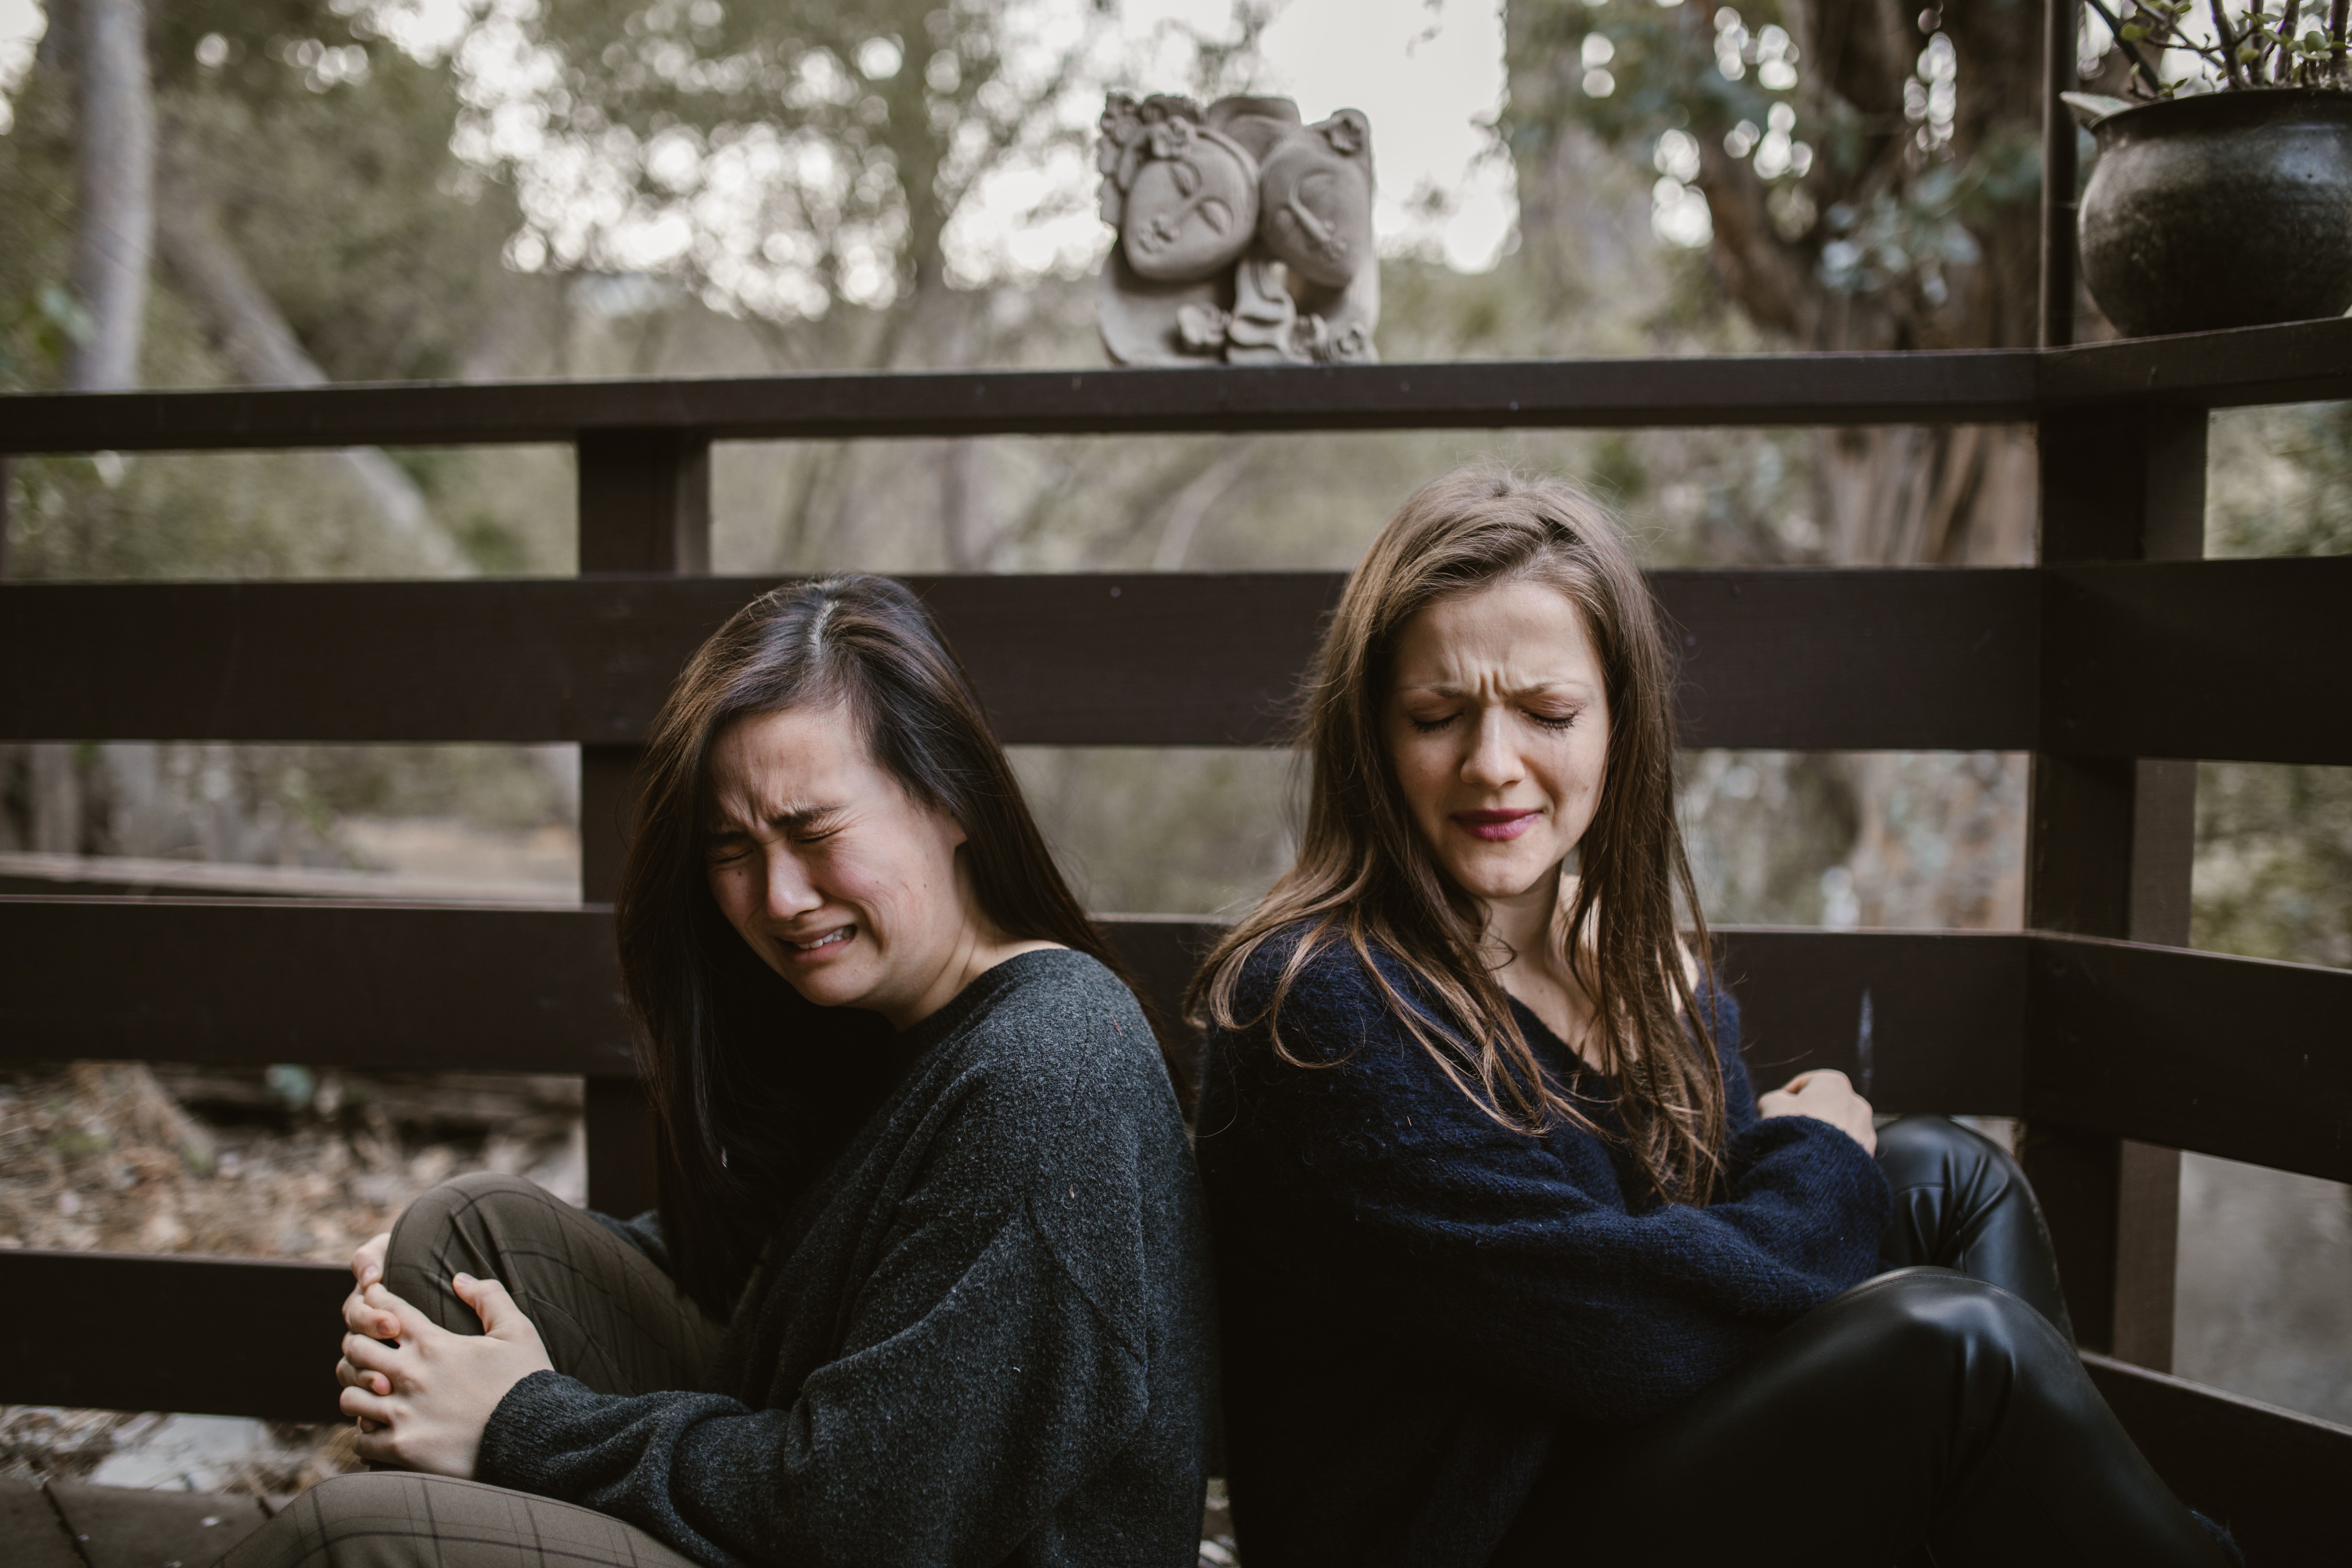 Pictured - Two young women sitting on a bench with their backs against each other crying | Source: Pexels 